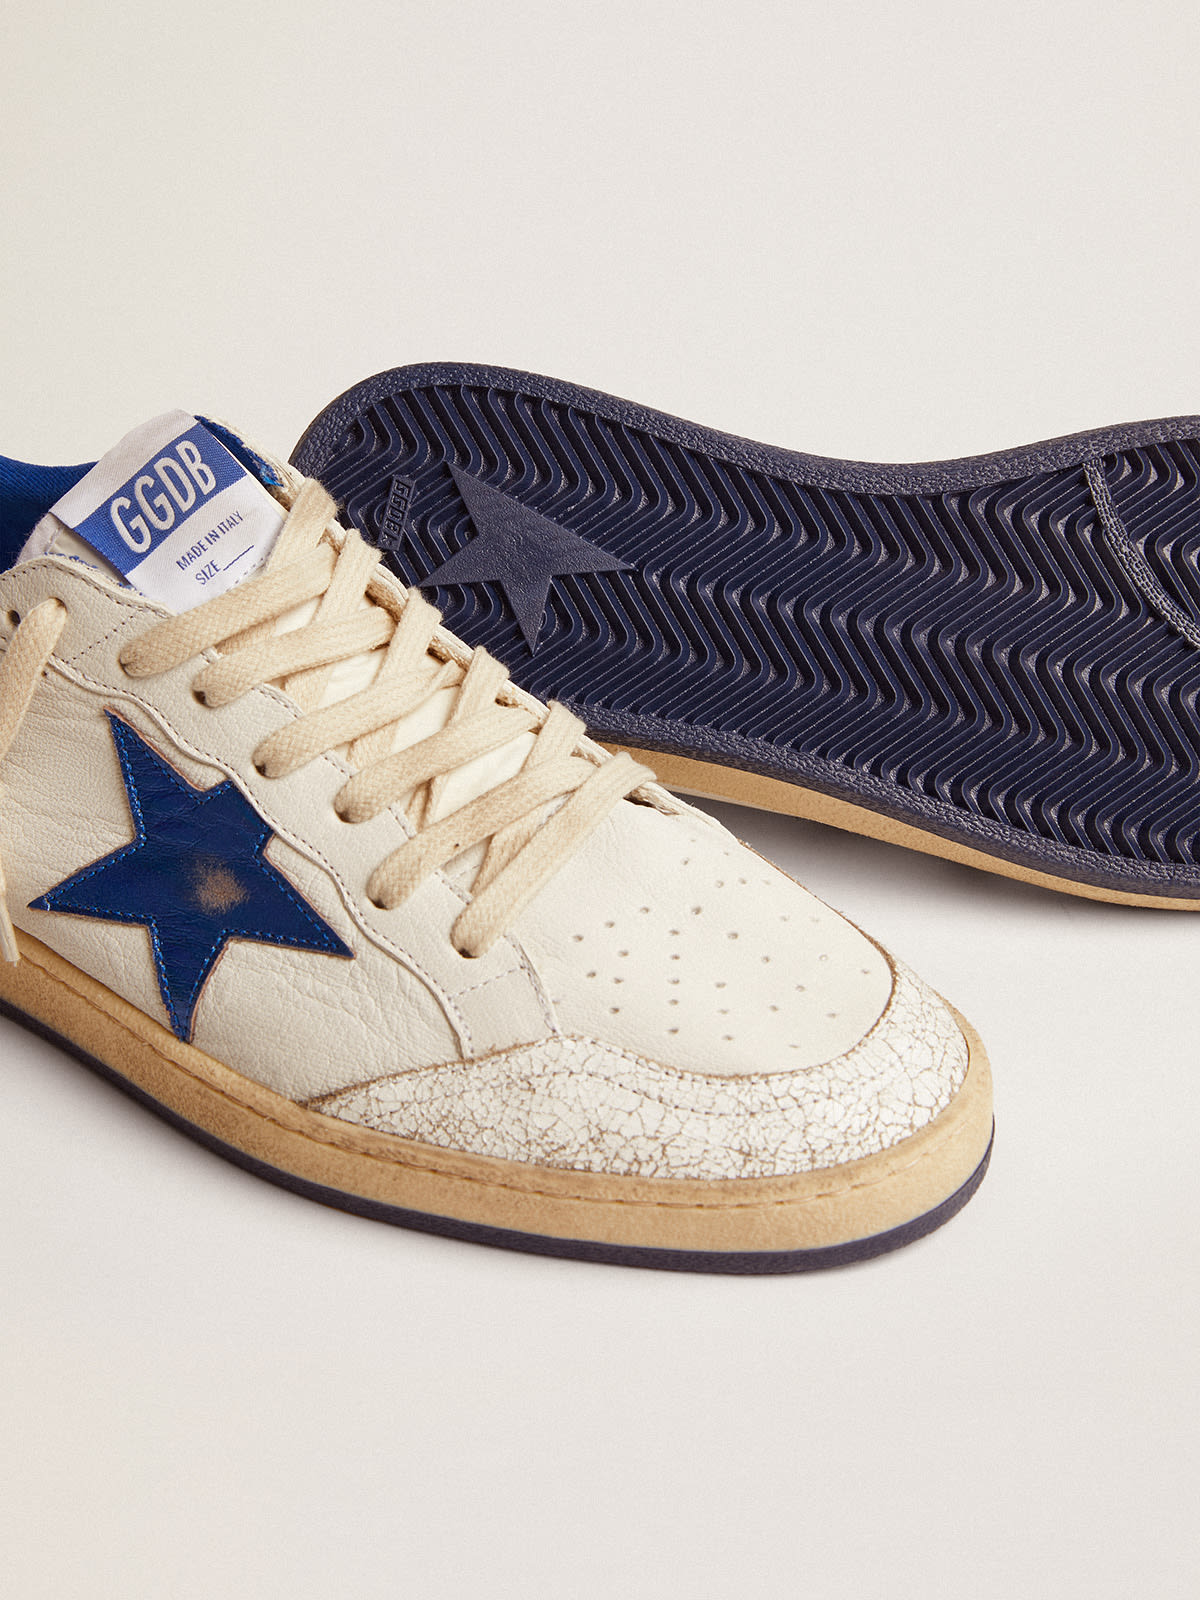 Golden Goose - Ball Star sneakers in white nappa leather with light blue laminated leather star and heel tab in 